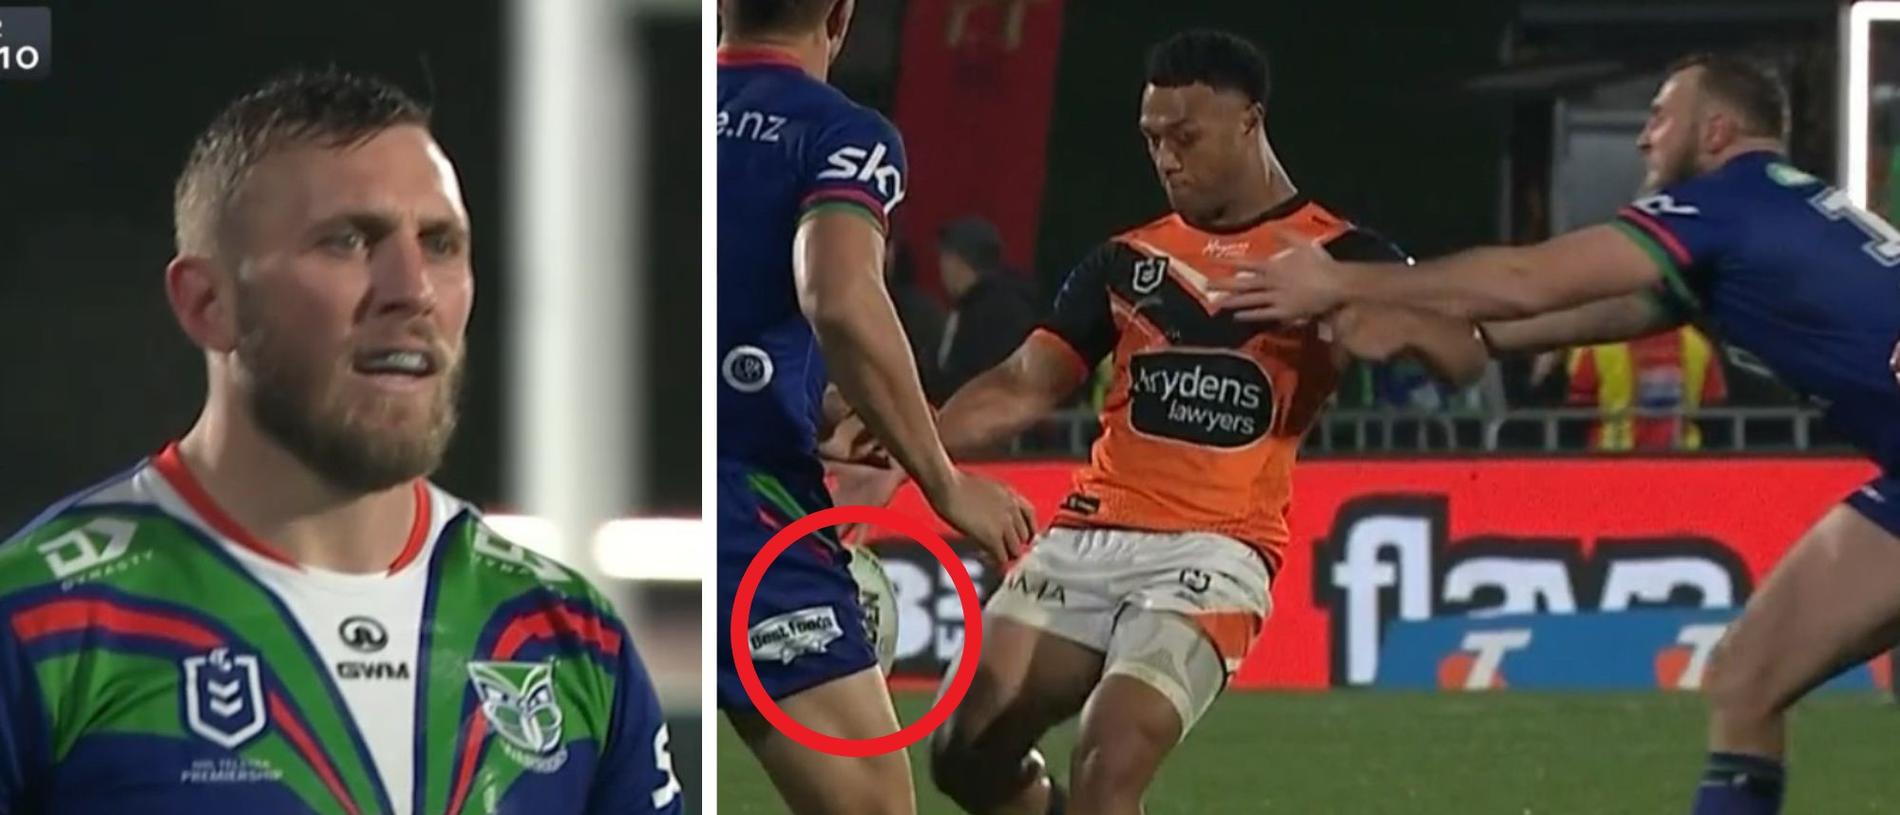 C'mon NRL, what are you doing? Photo: Fox Sports